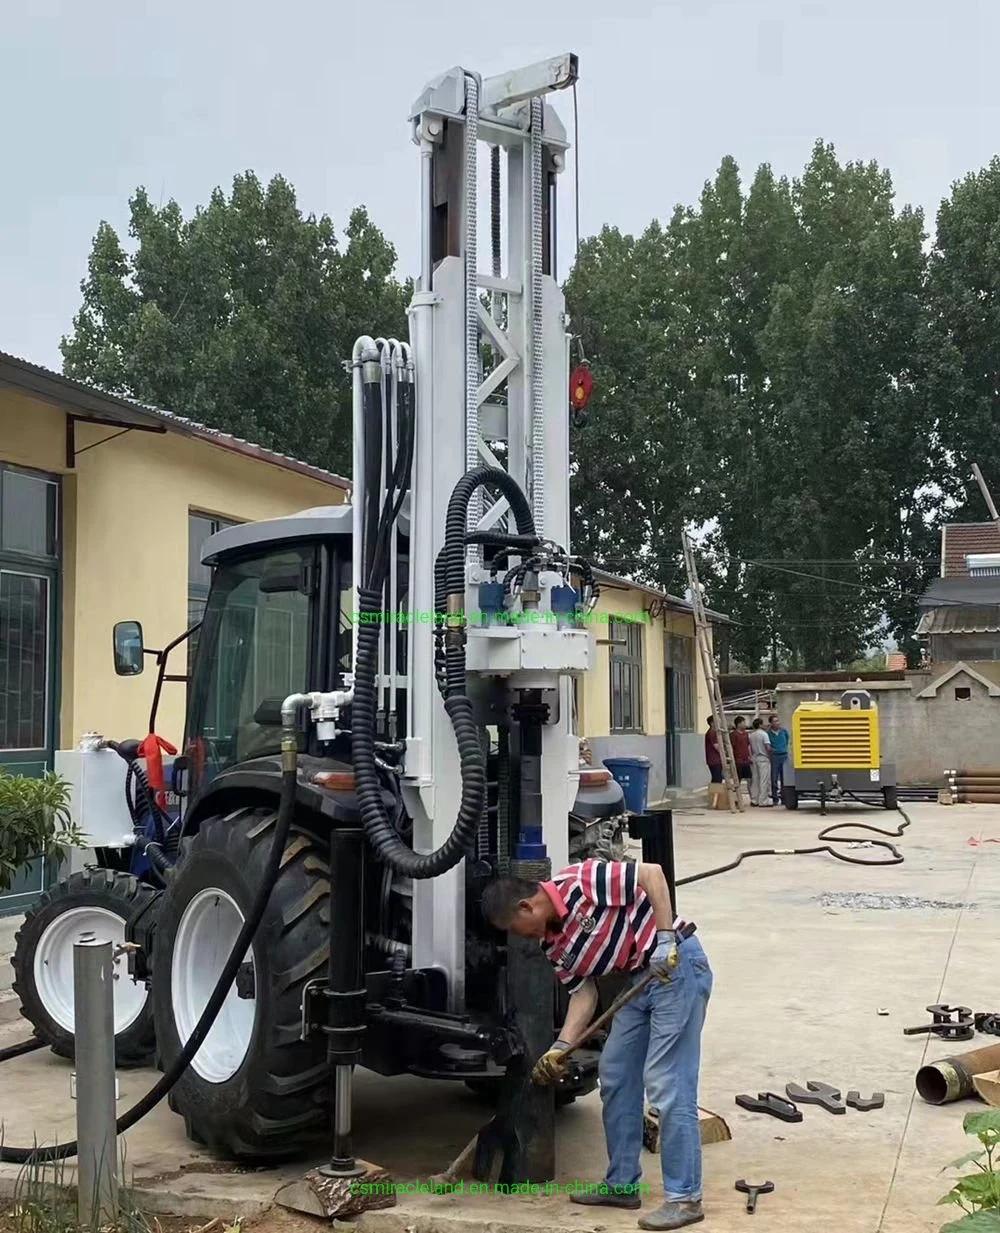 200m Tractor Full Hydraulic Top Drive DTH Rock Water Well Borehole Drilling Machine